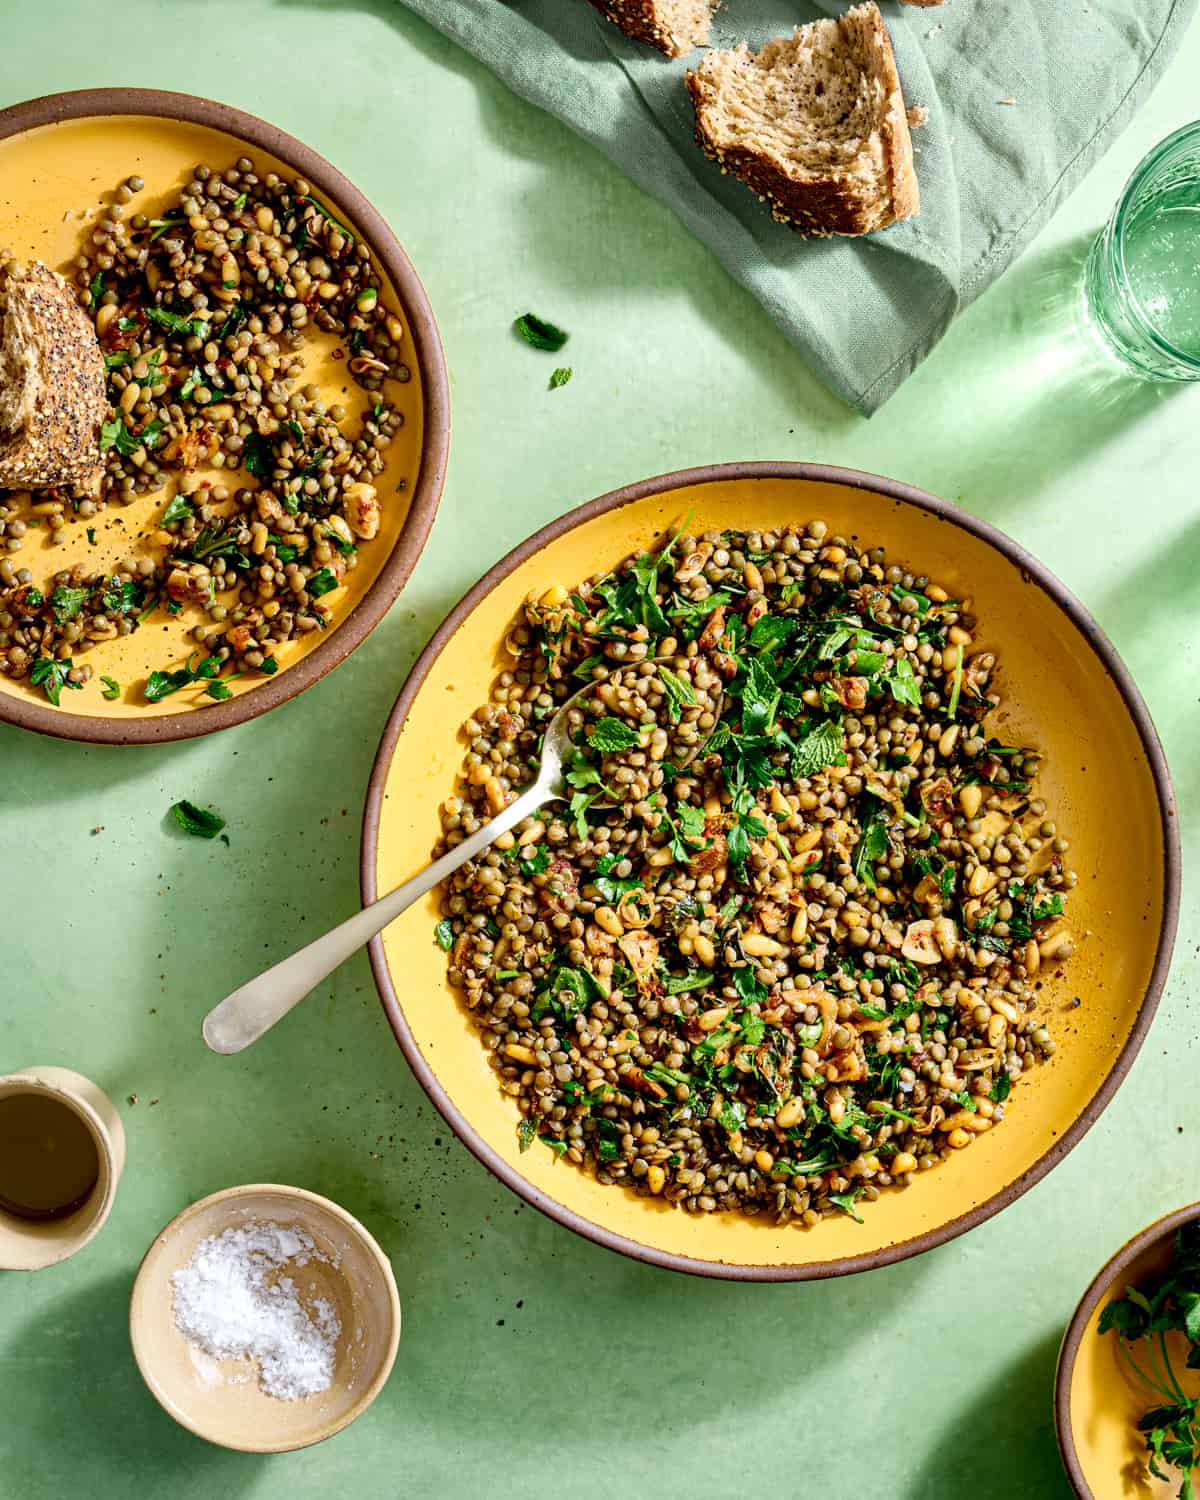 Overhead view of a bowl and a plate of lentil salad and a chunk of bread on a green table.